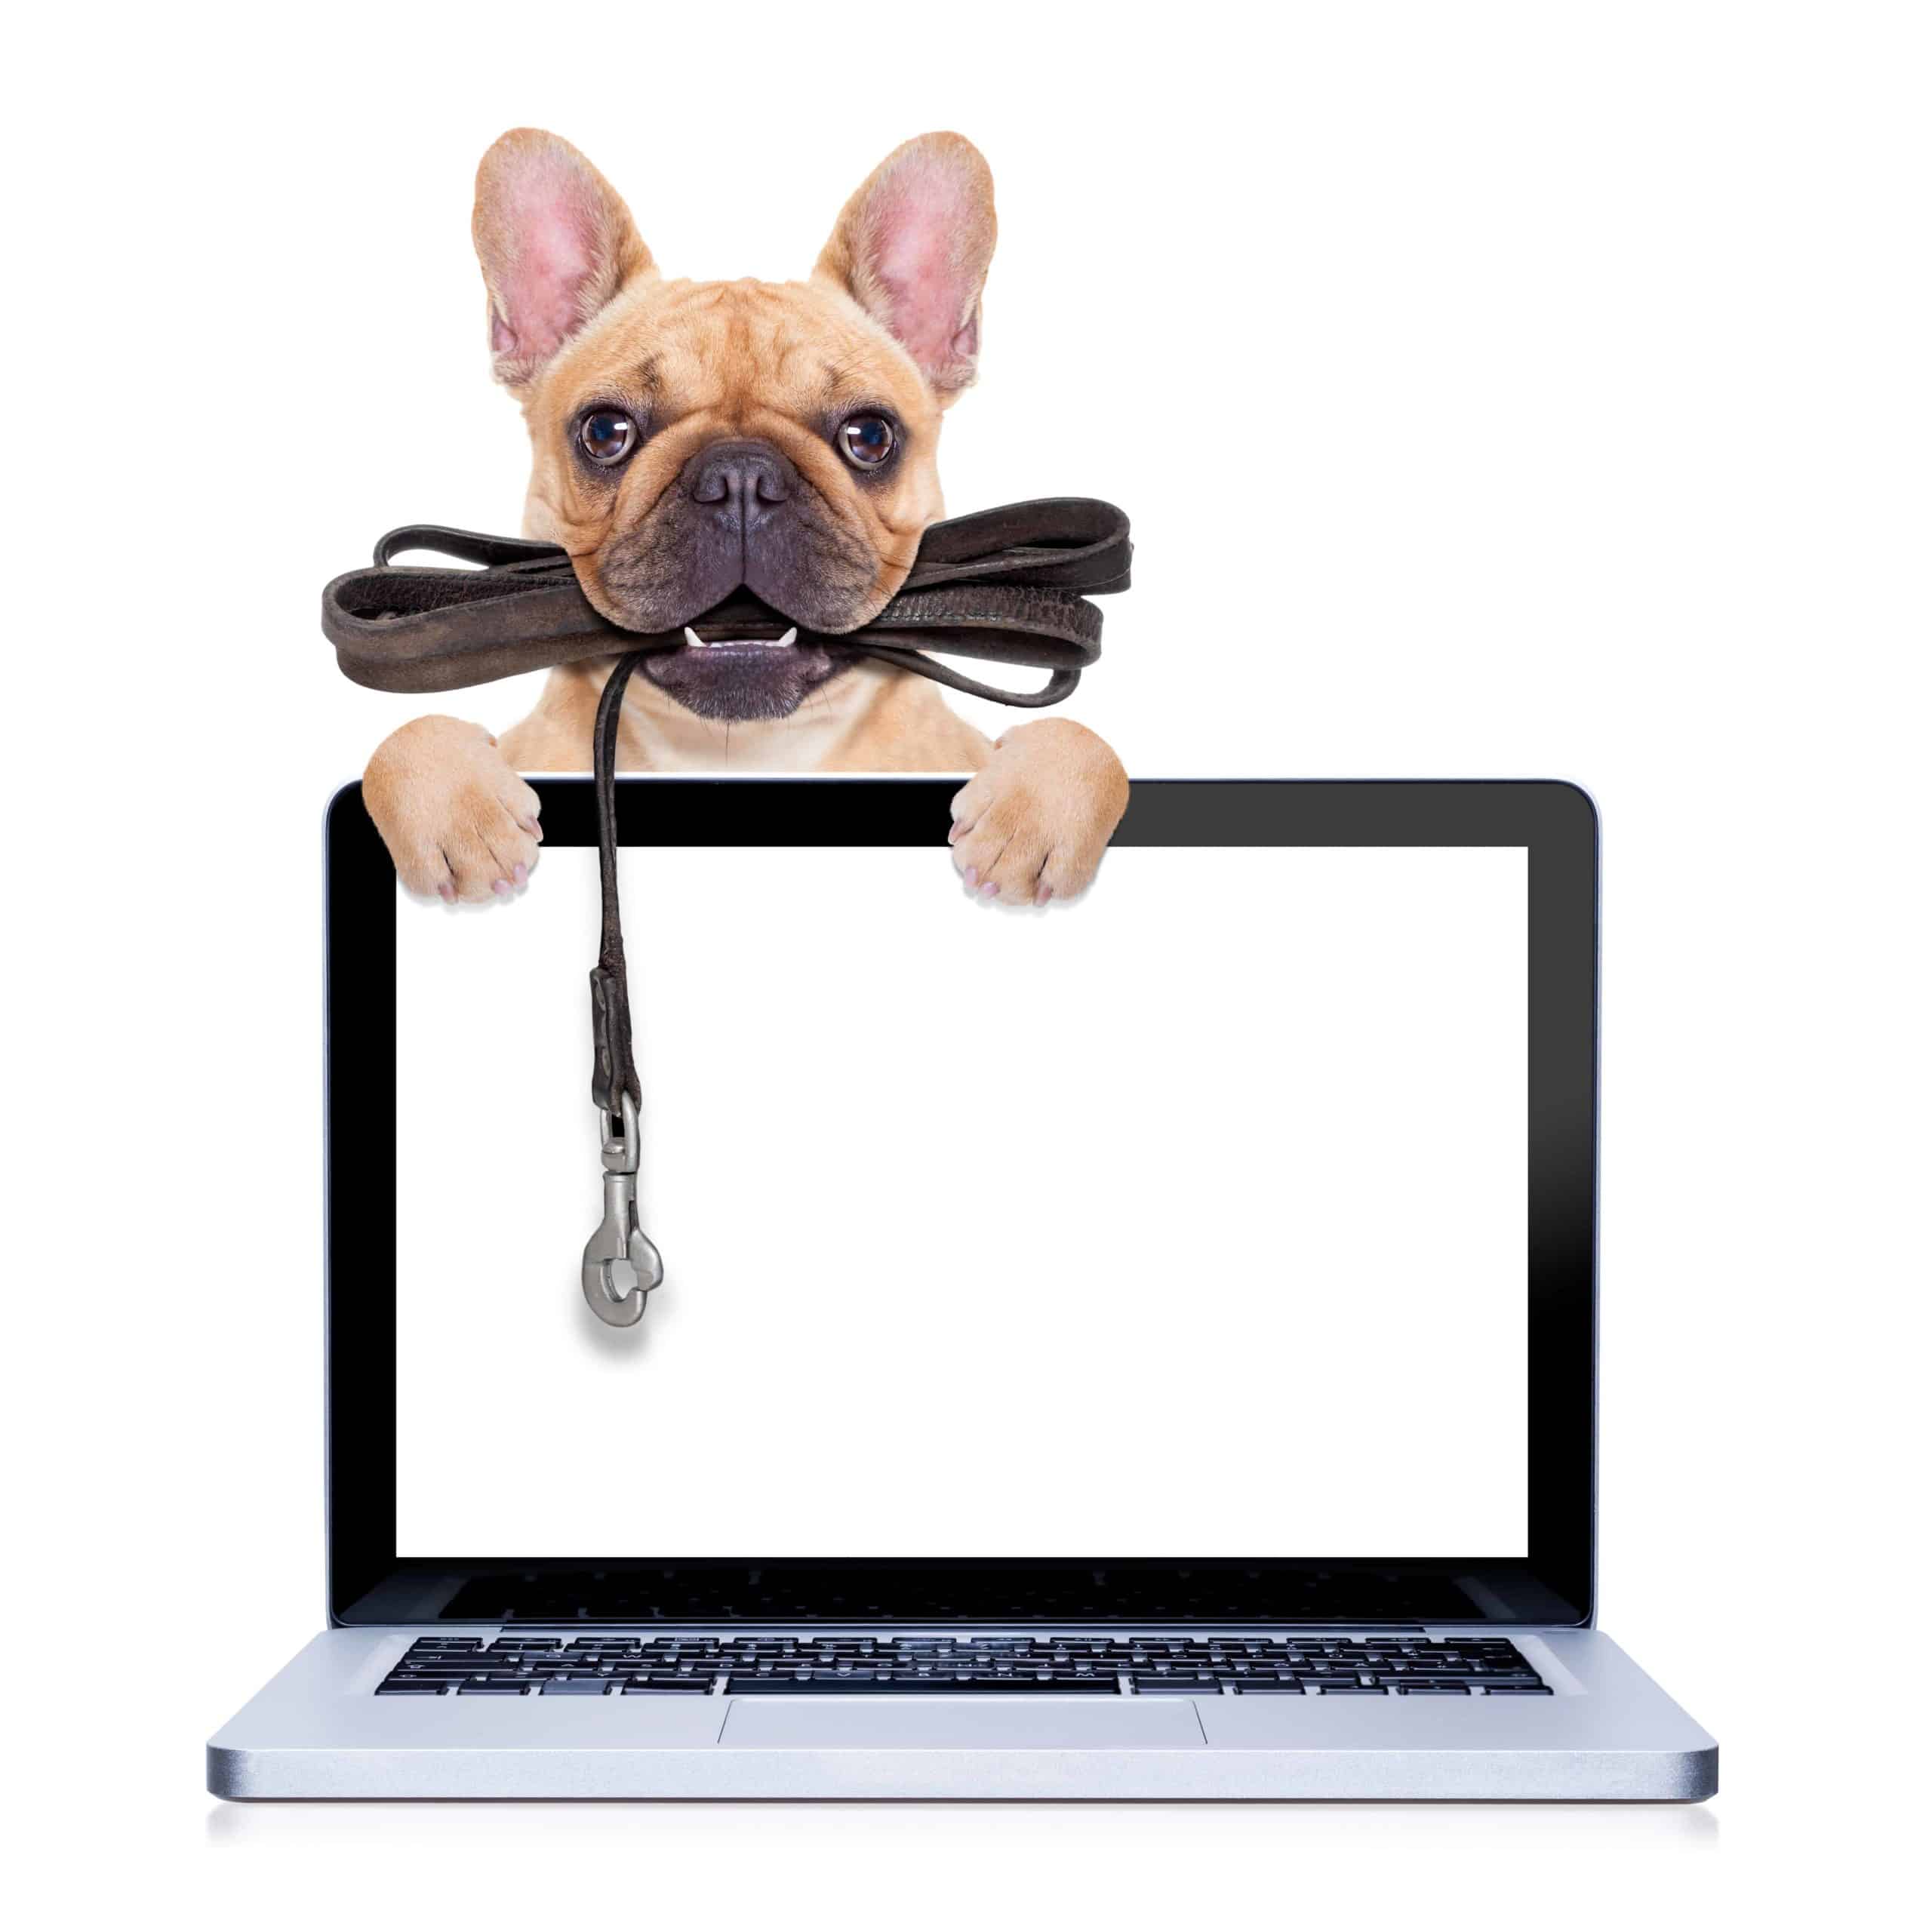 Virtual pet training: Interactive online private lessons or group classes